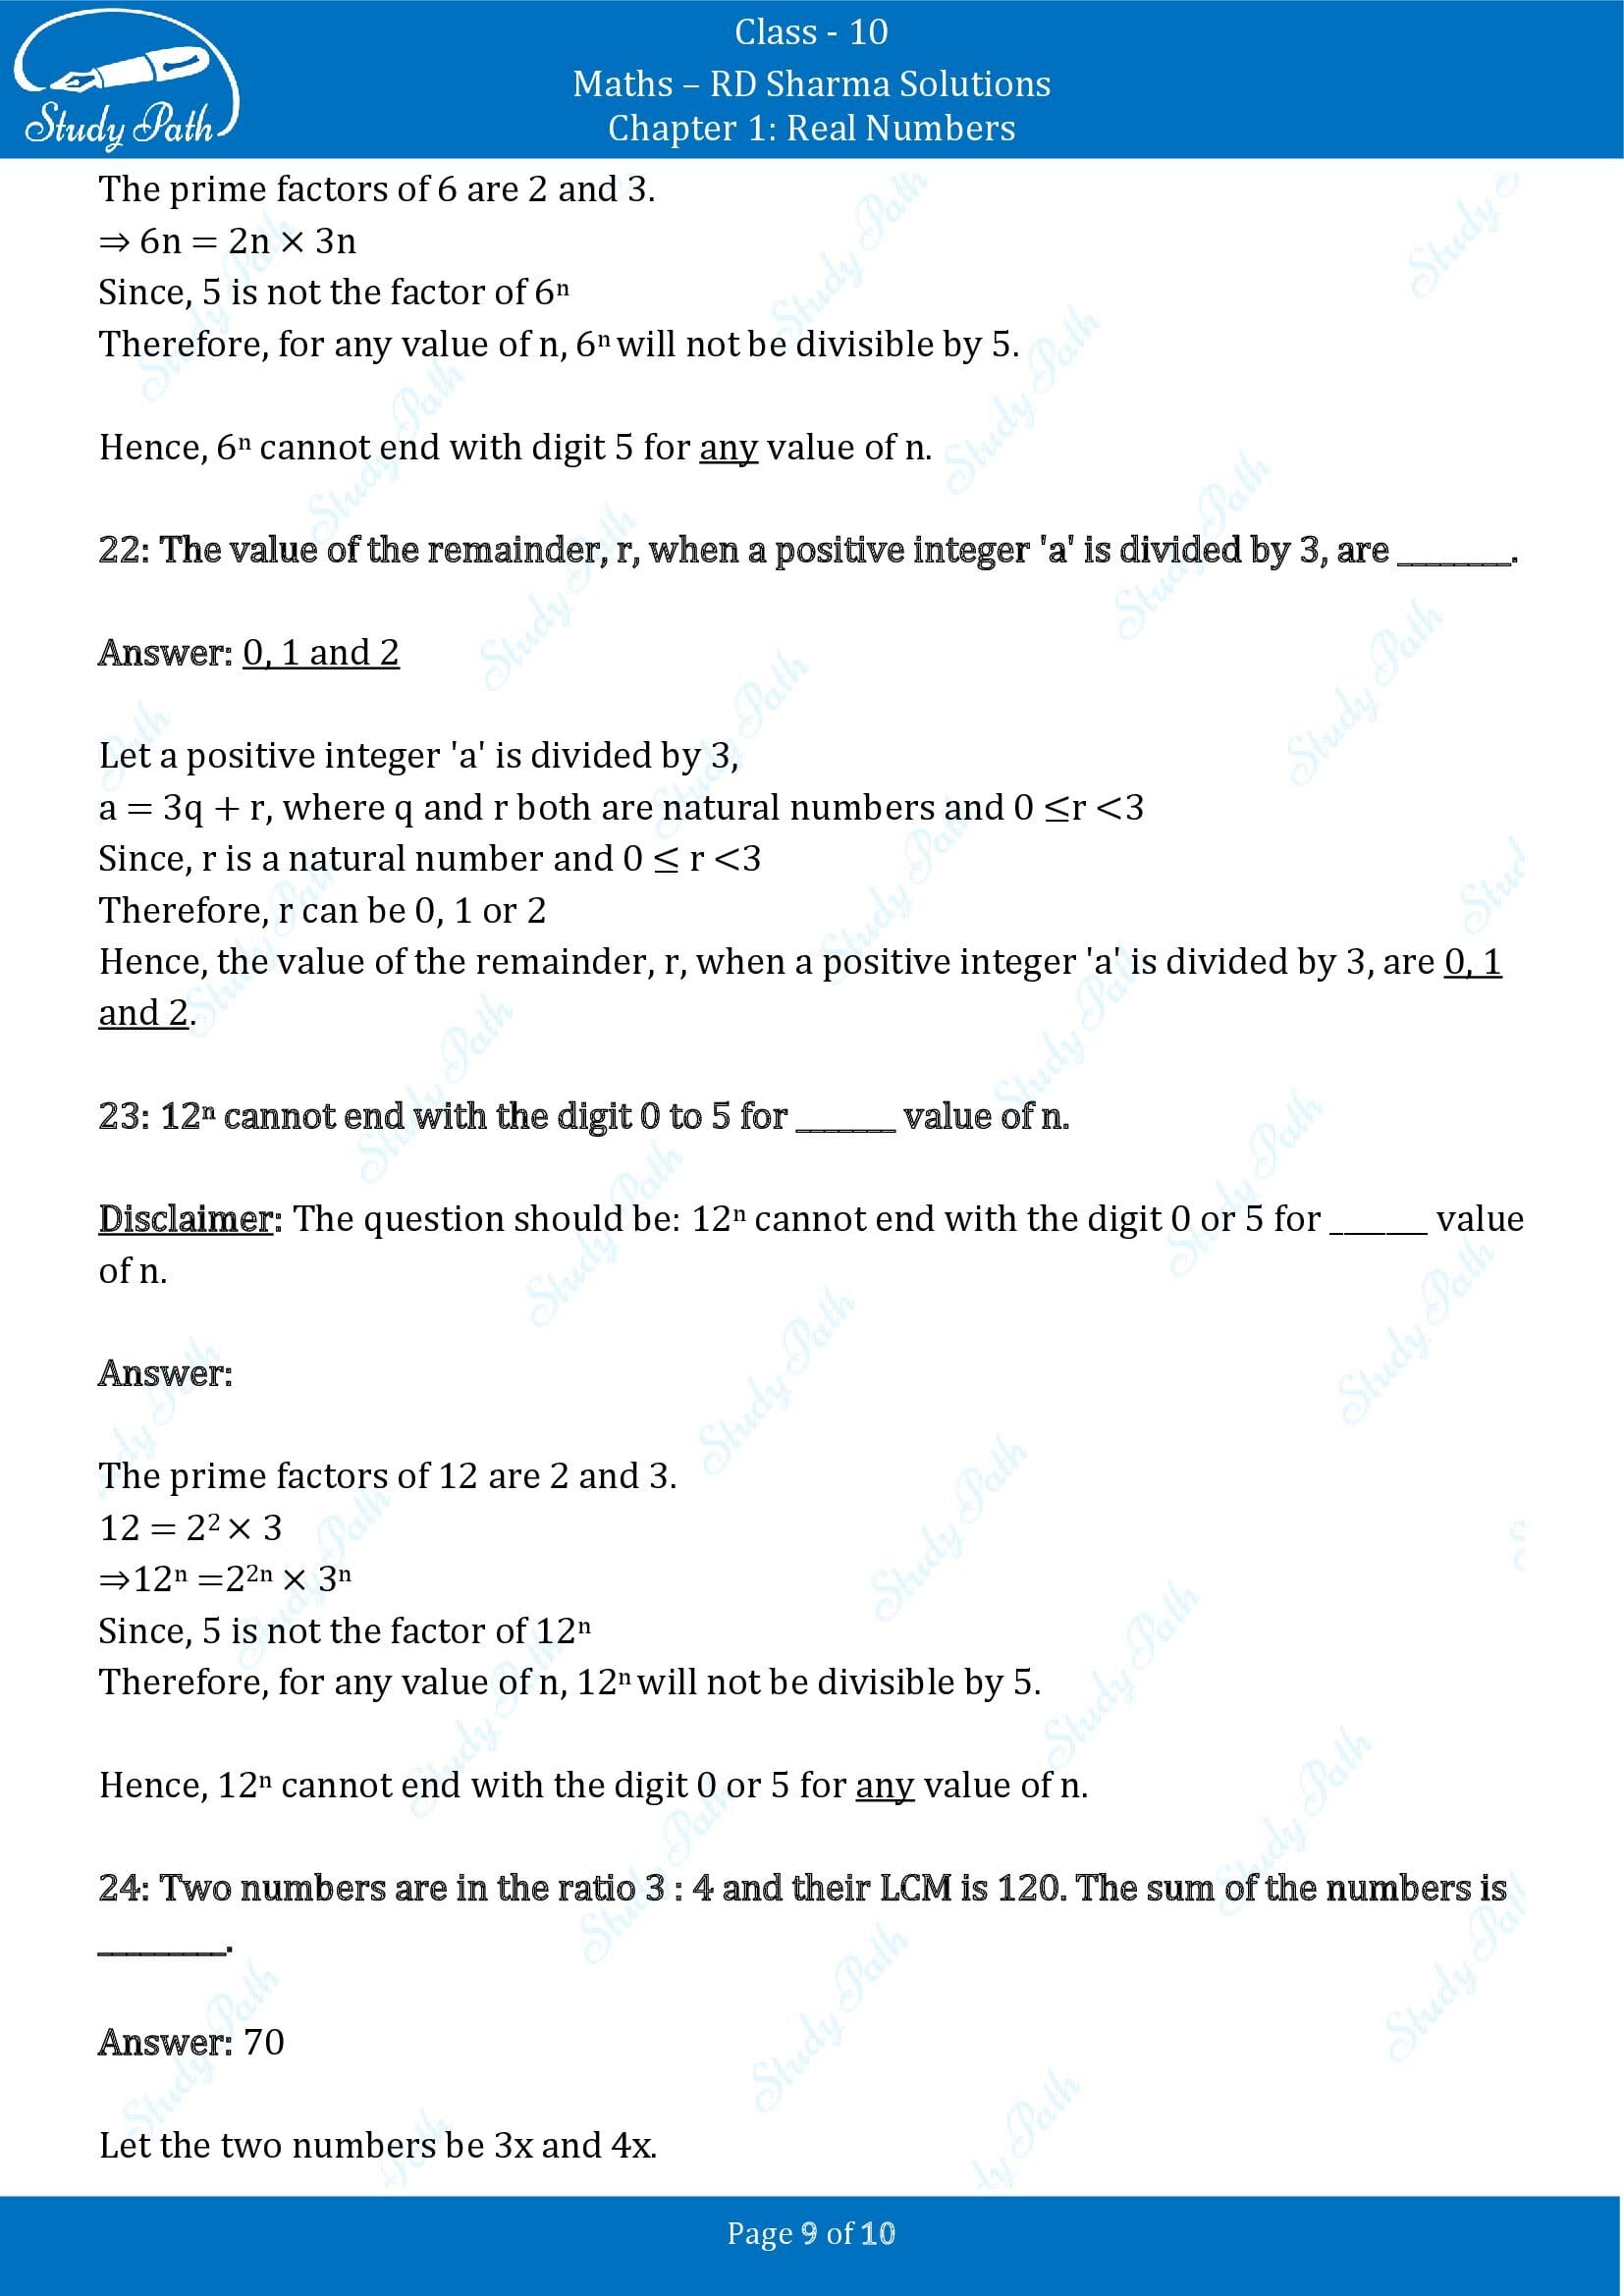 RD Sharma Solutions Class 10 Chapter 1 Real Numbers Fill in the Blank Type Questions FBQs 00009